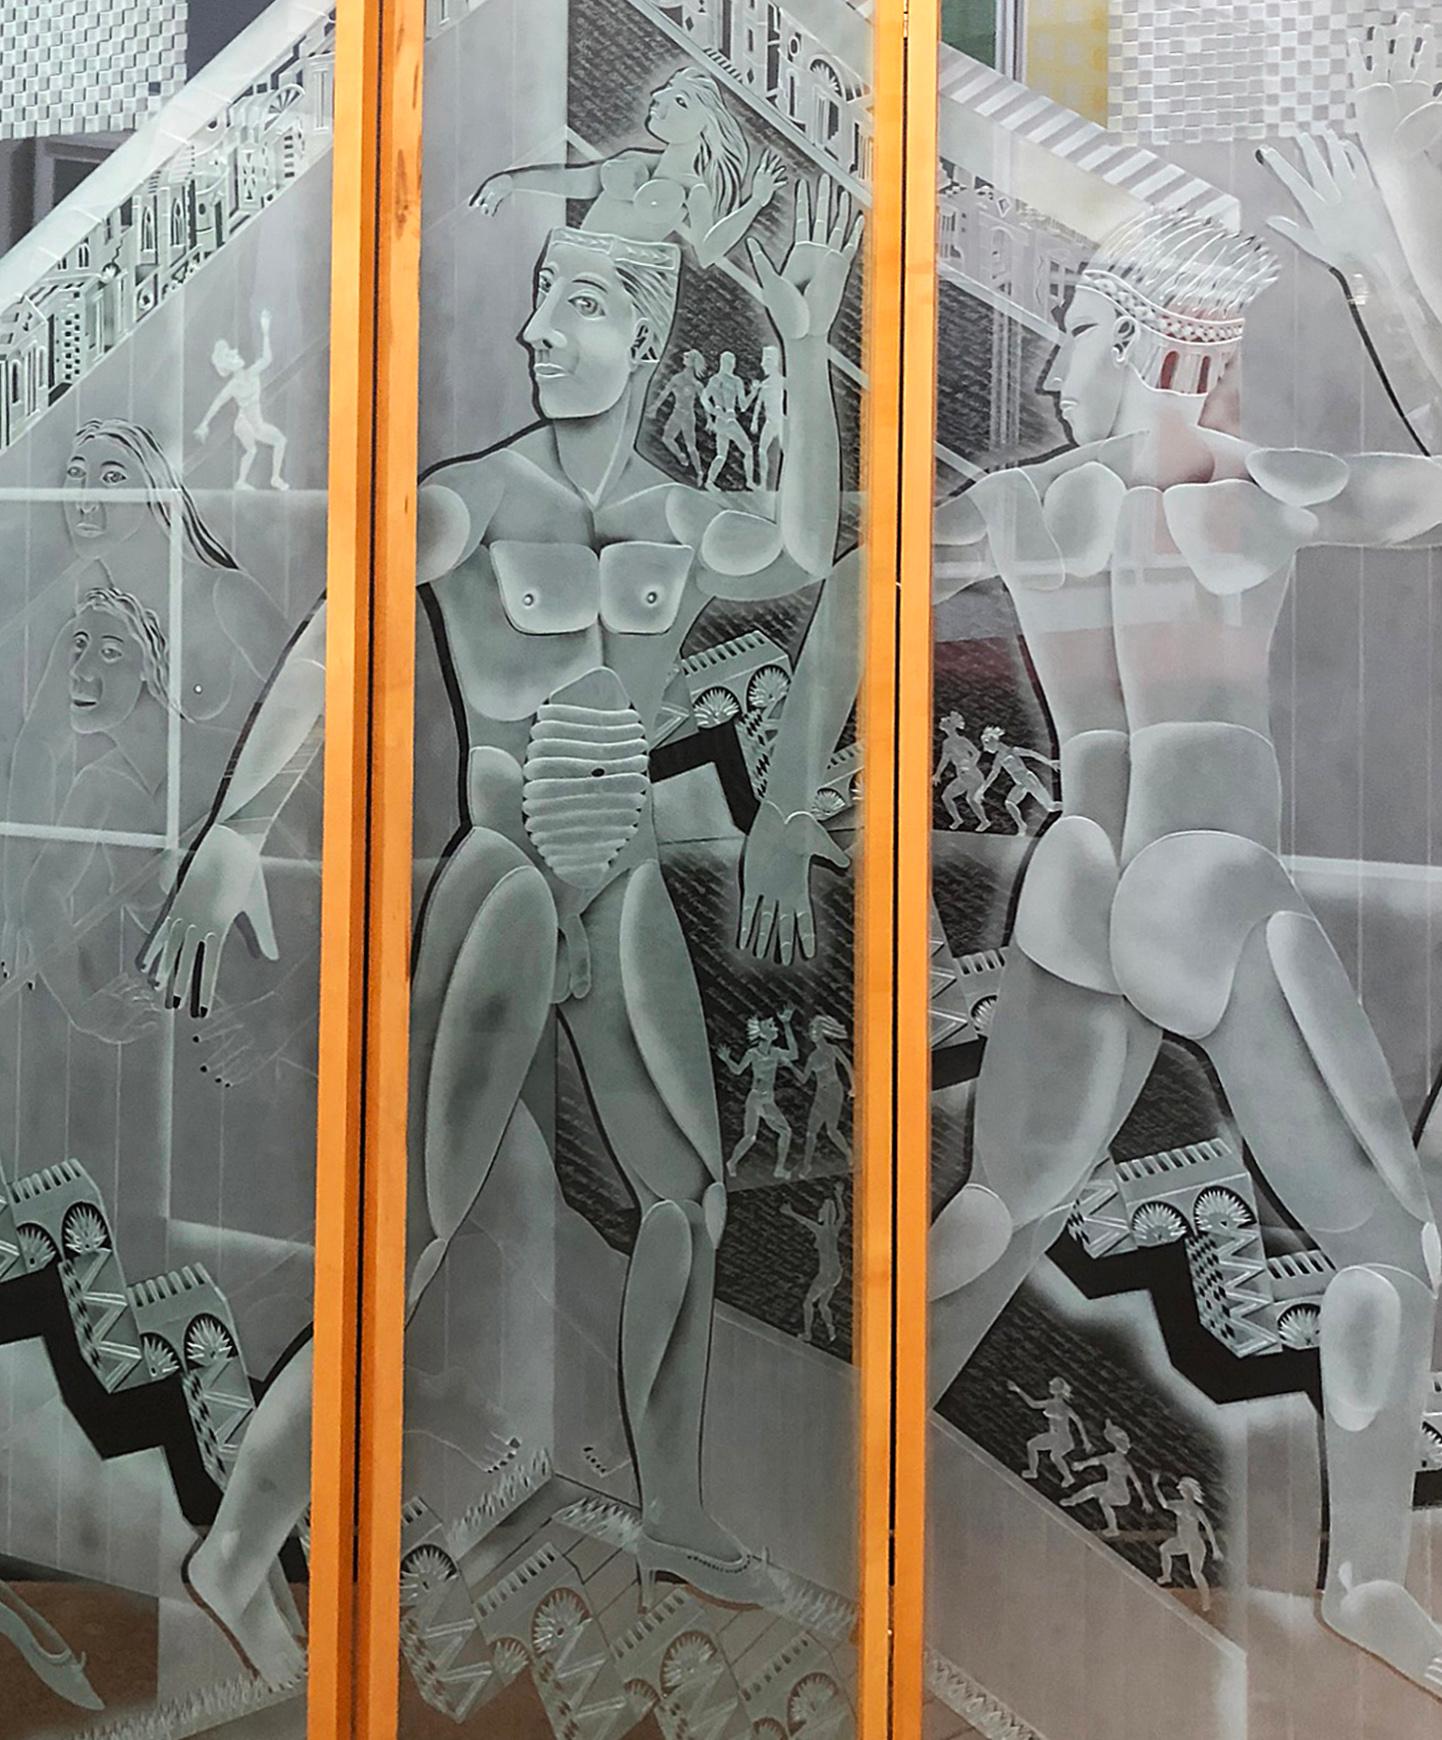 Fine art, etched and sandblasted glass screen by American artist, Patrick Wadley (1950 - 1992) Signed and dated 1987. The panels are framed with wood and are connected with hinges. Each panel measures: 73 1/2